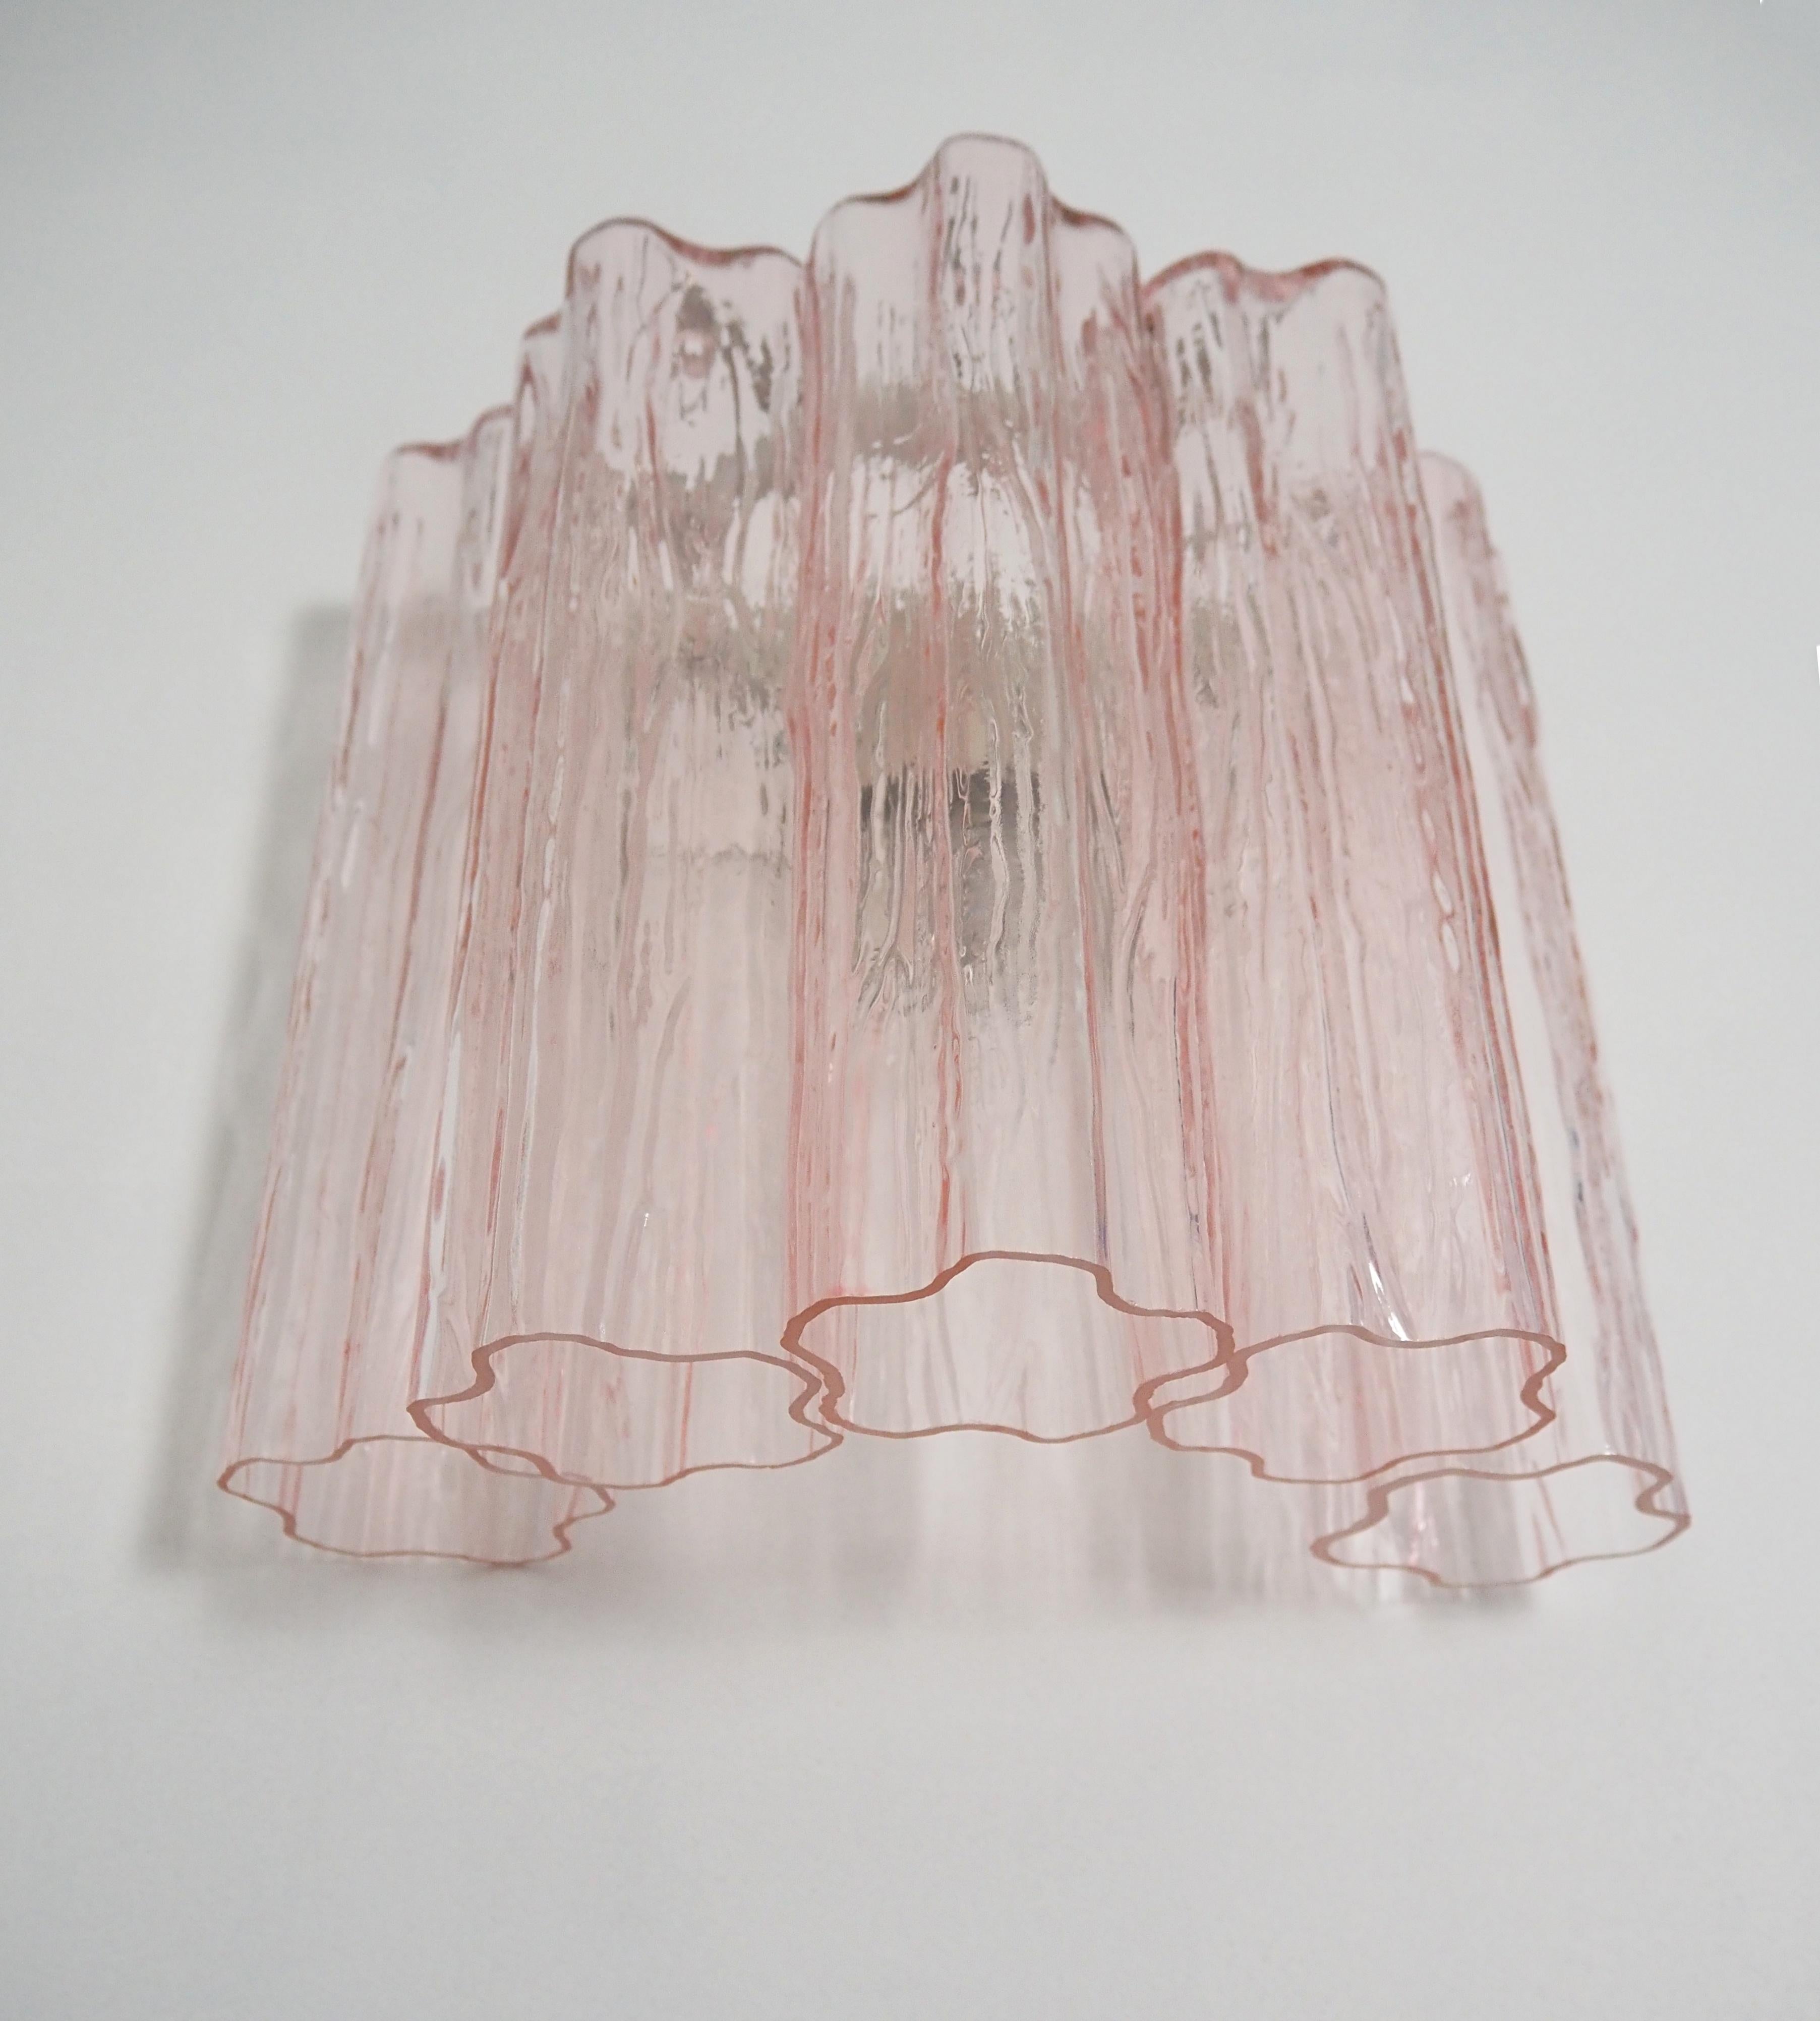 Fantastic pair of Murano Glass Tube wall sconces - 5 pink glass tube 4